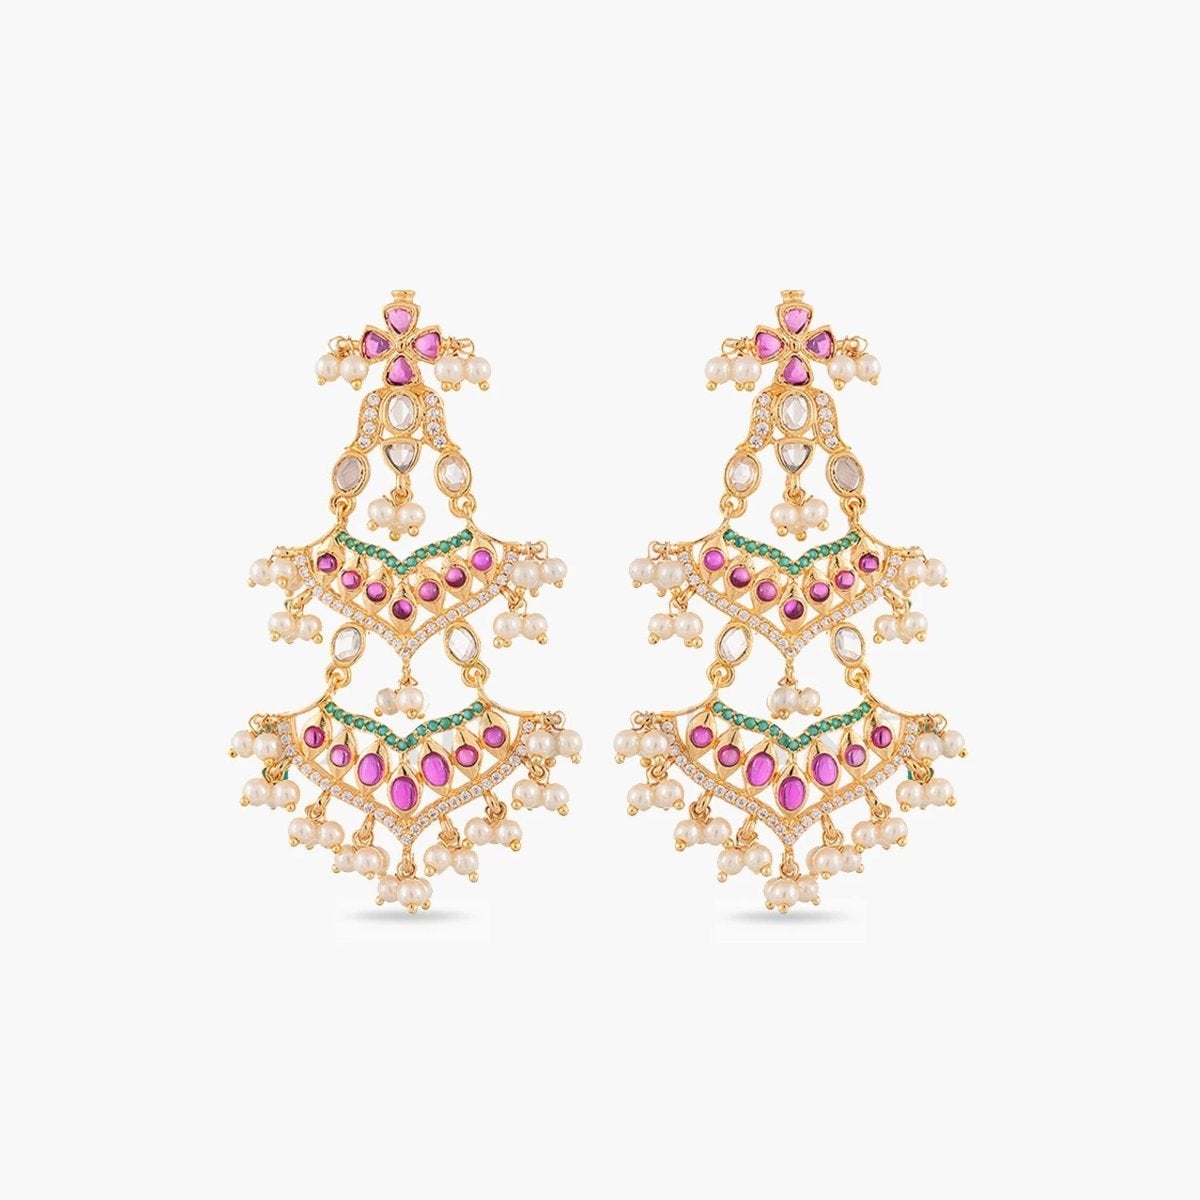 Shop these 13 cute earrings online for a perfectly curated ear